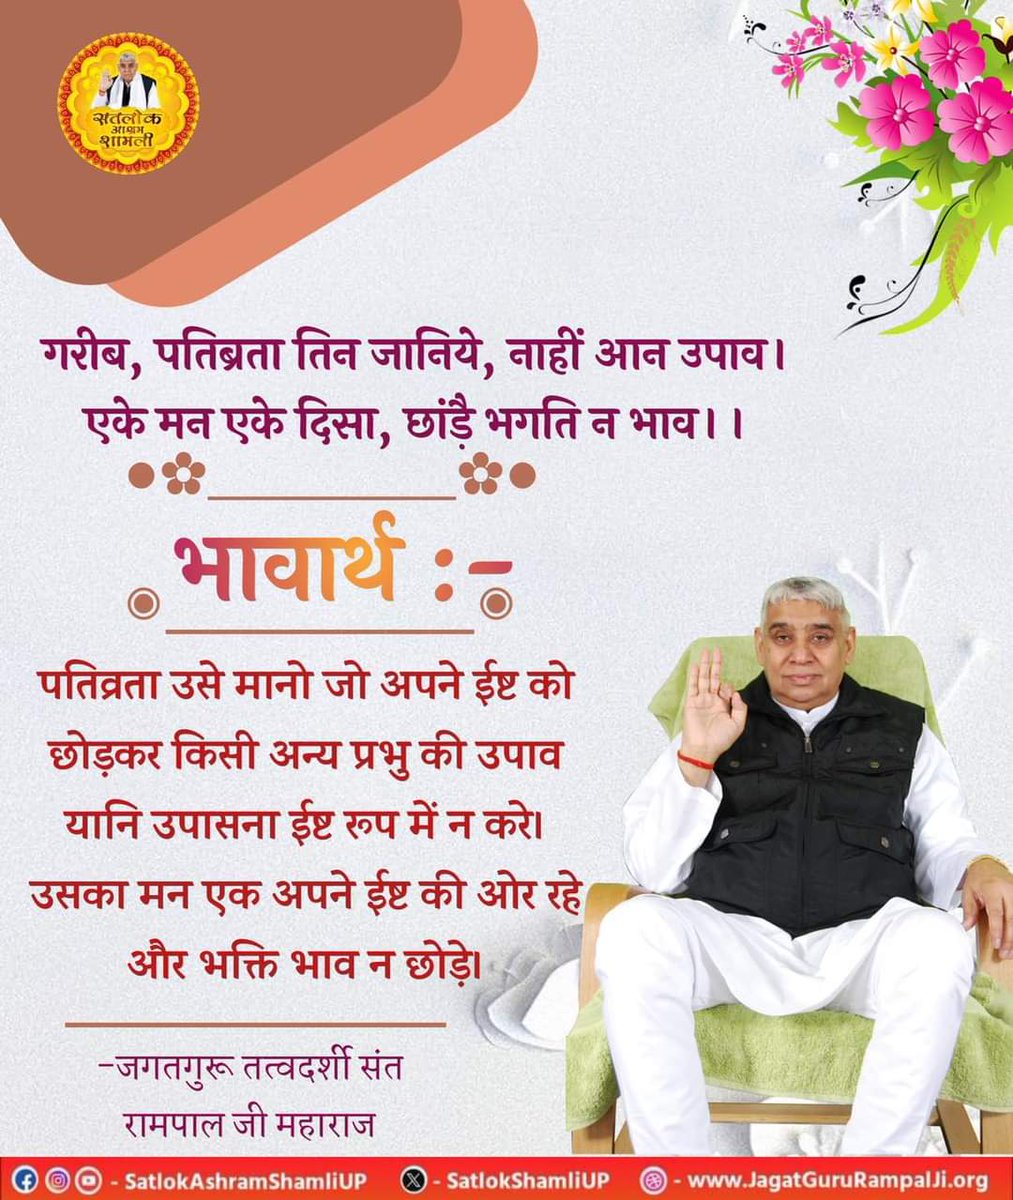 #Who_Is_AadiRam
For more information visit sant Rampal Ji Maharaj on YouTube channel